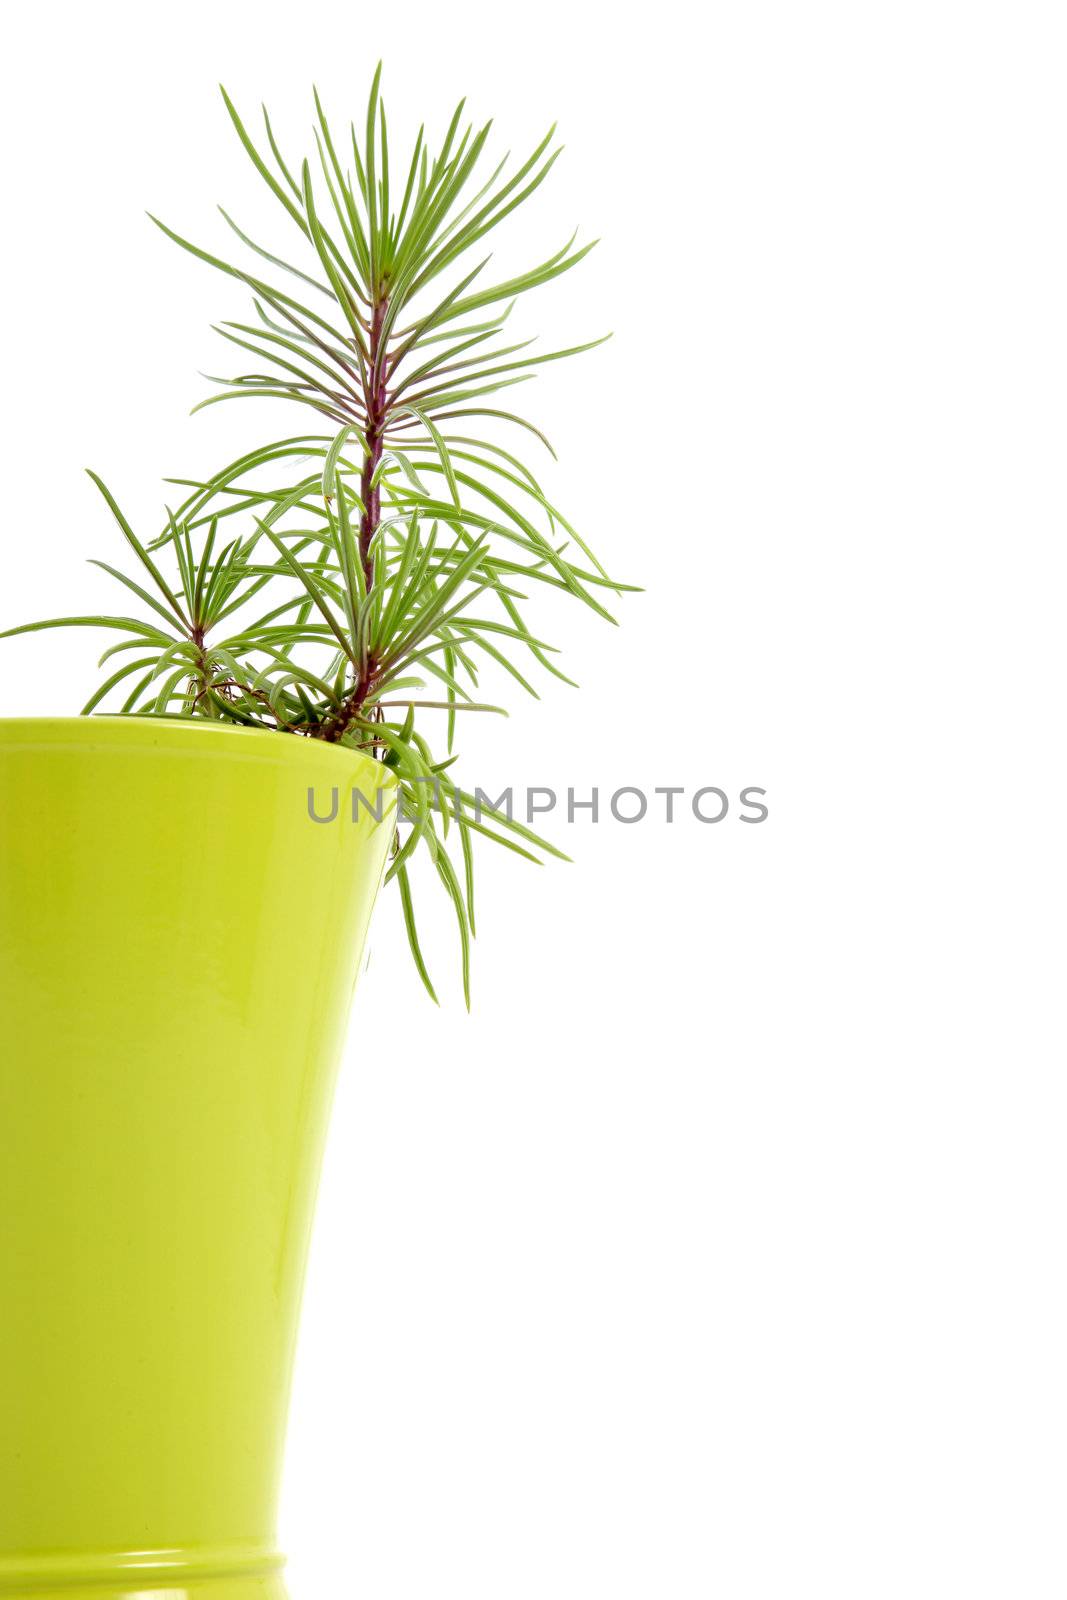 Young houseplant growing in a decorative yellow-green flowerpot, partial cropped view with half the pot visible isolated on a white background with copyspace